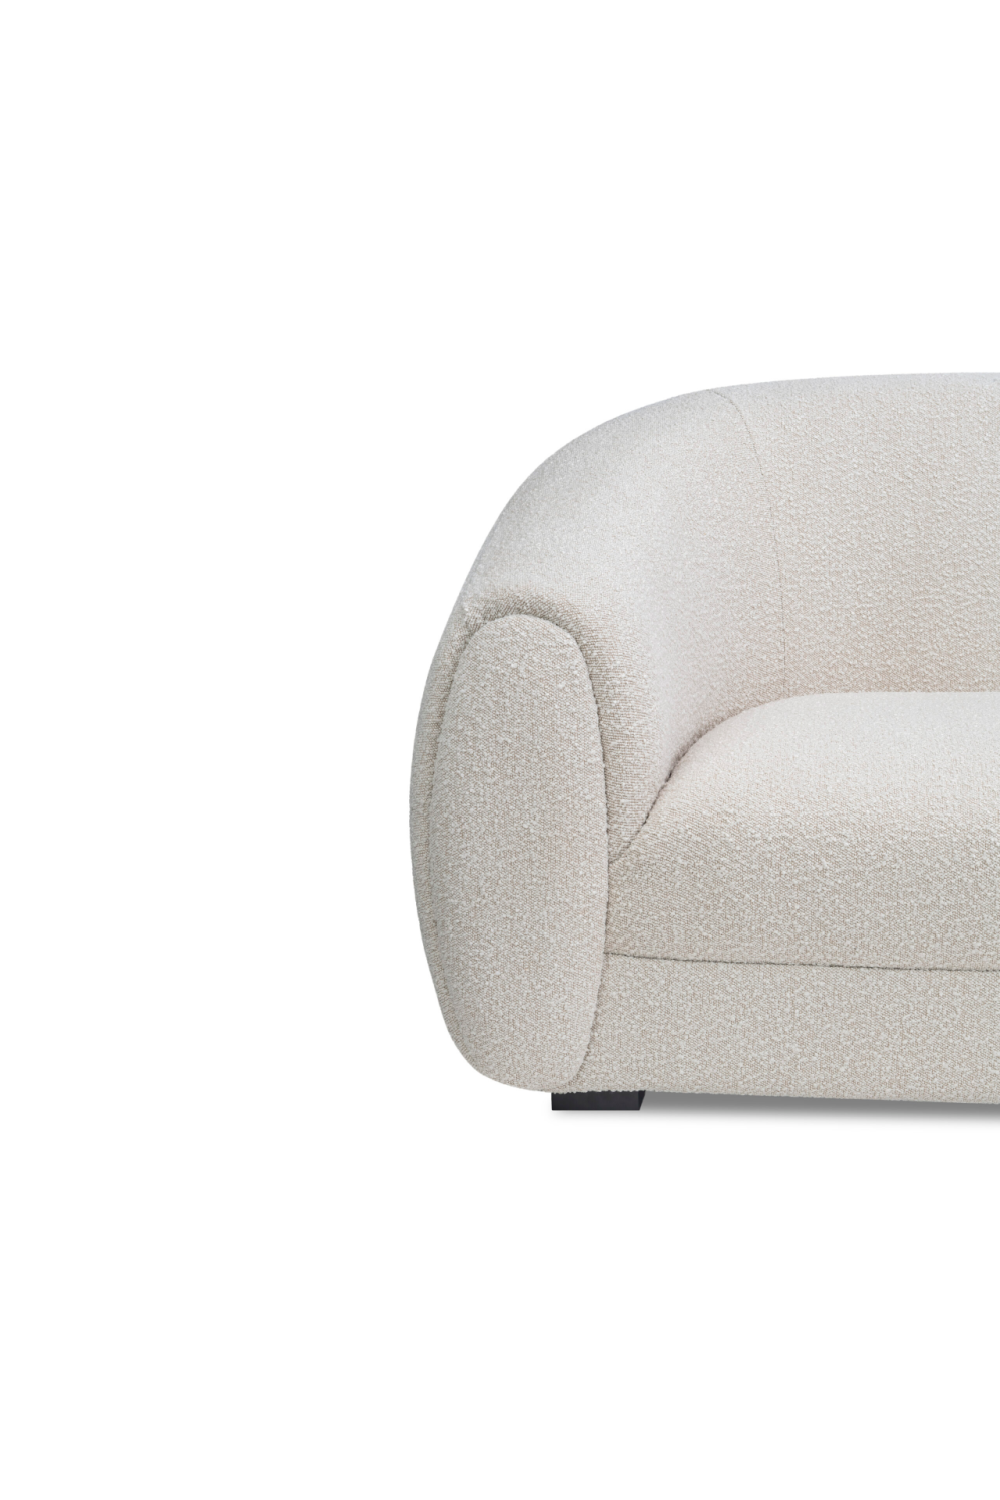 White Bouclé Upholstered Sofa | Liang & Eimil Voltaire | OROA